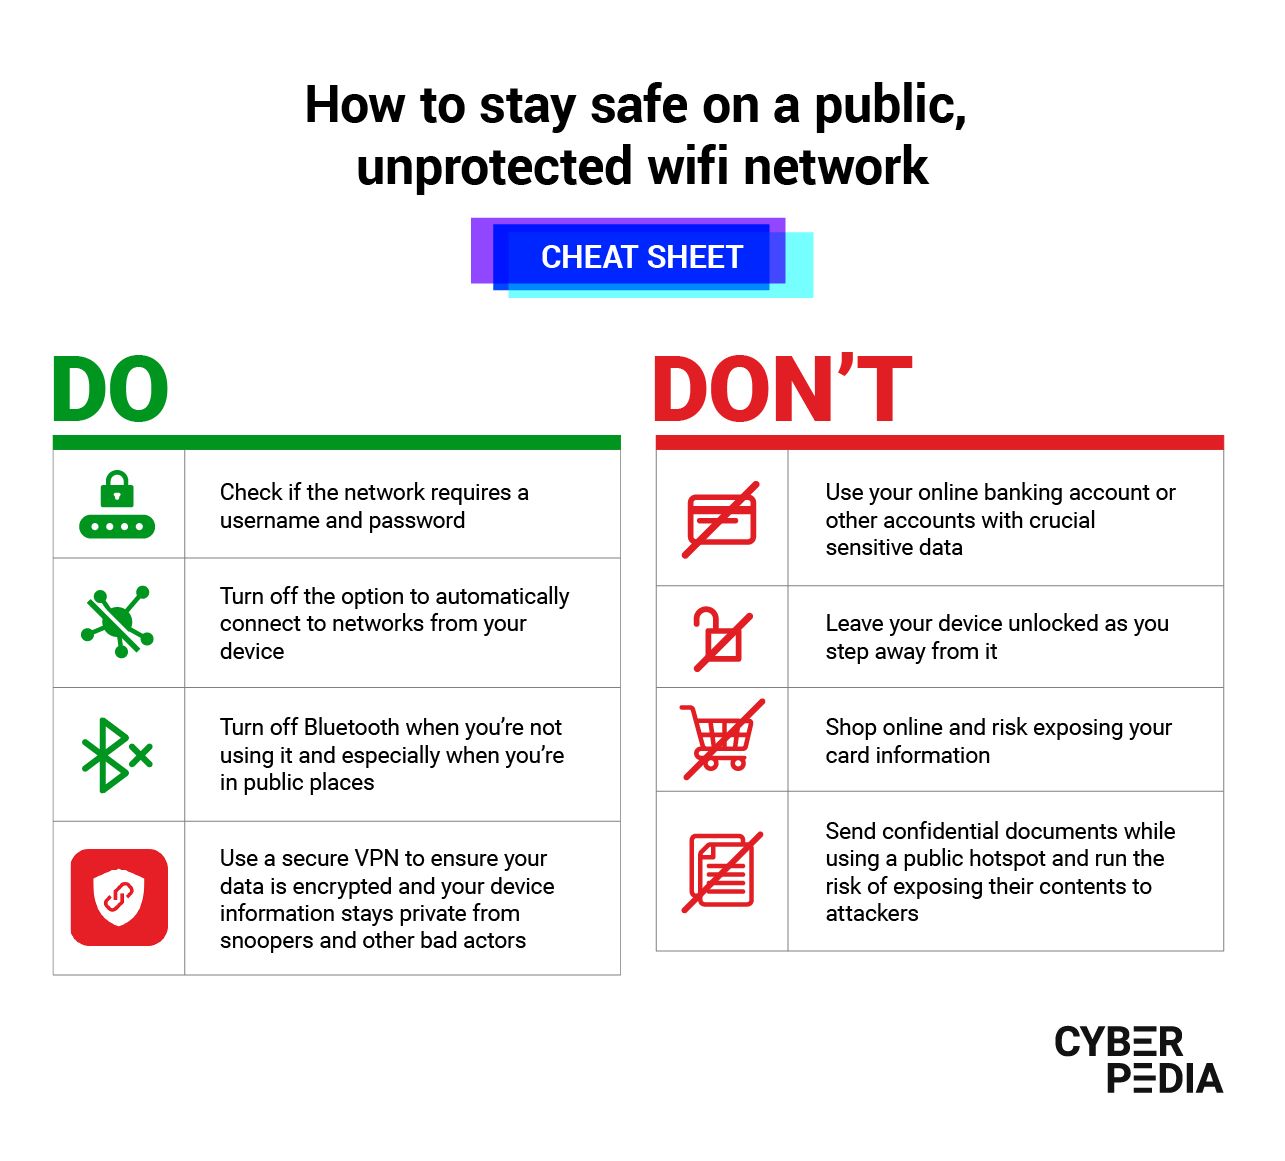 How to secure public Wi-Fi